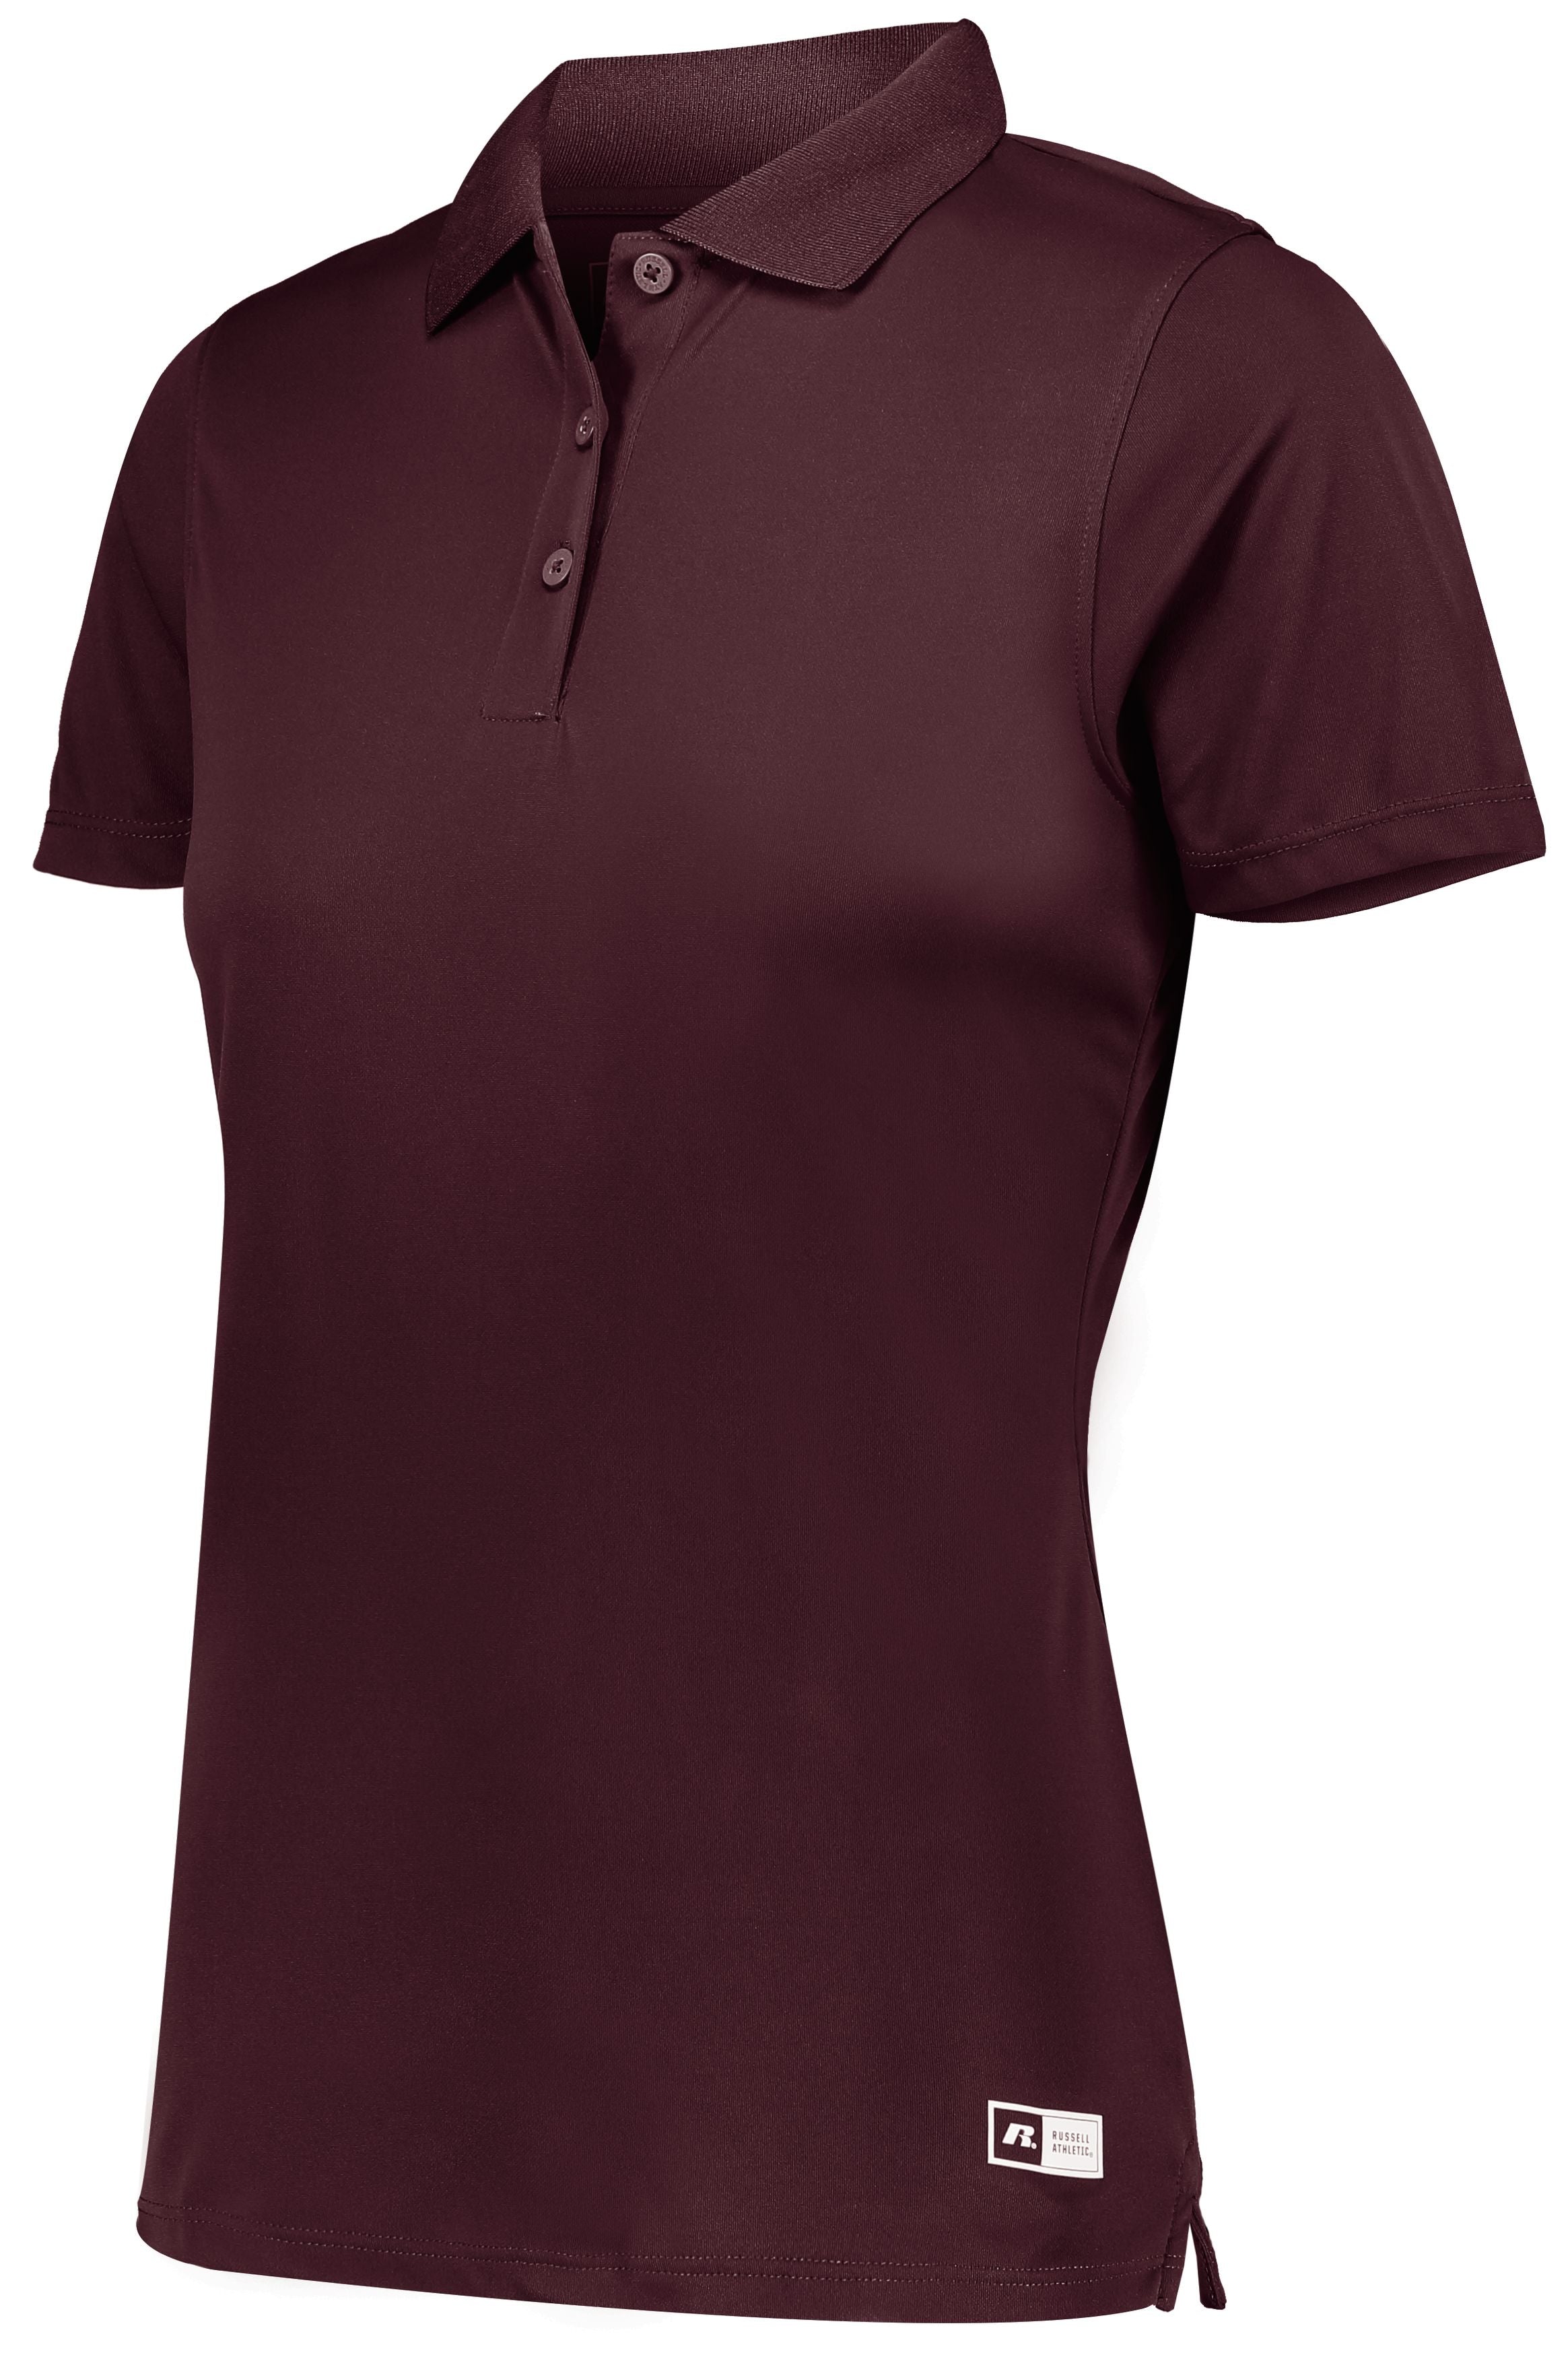 Russell Athletic Ladies Essential Polo in Maroon  -Part of the Ladies, Ladies-Polo, Polos, Russell-Athletic-Products, Shirts, Corporate-Collection product lines at KanaleyCreations.com